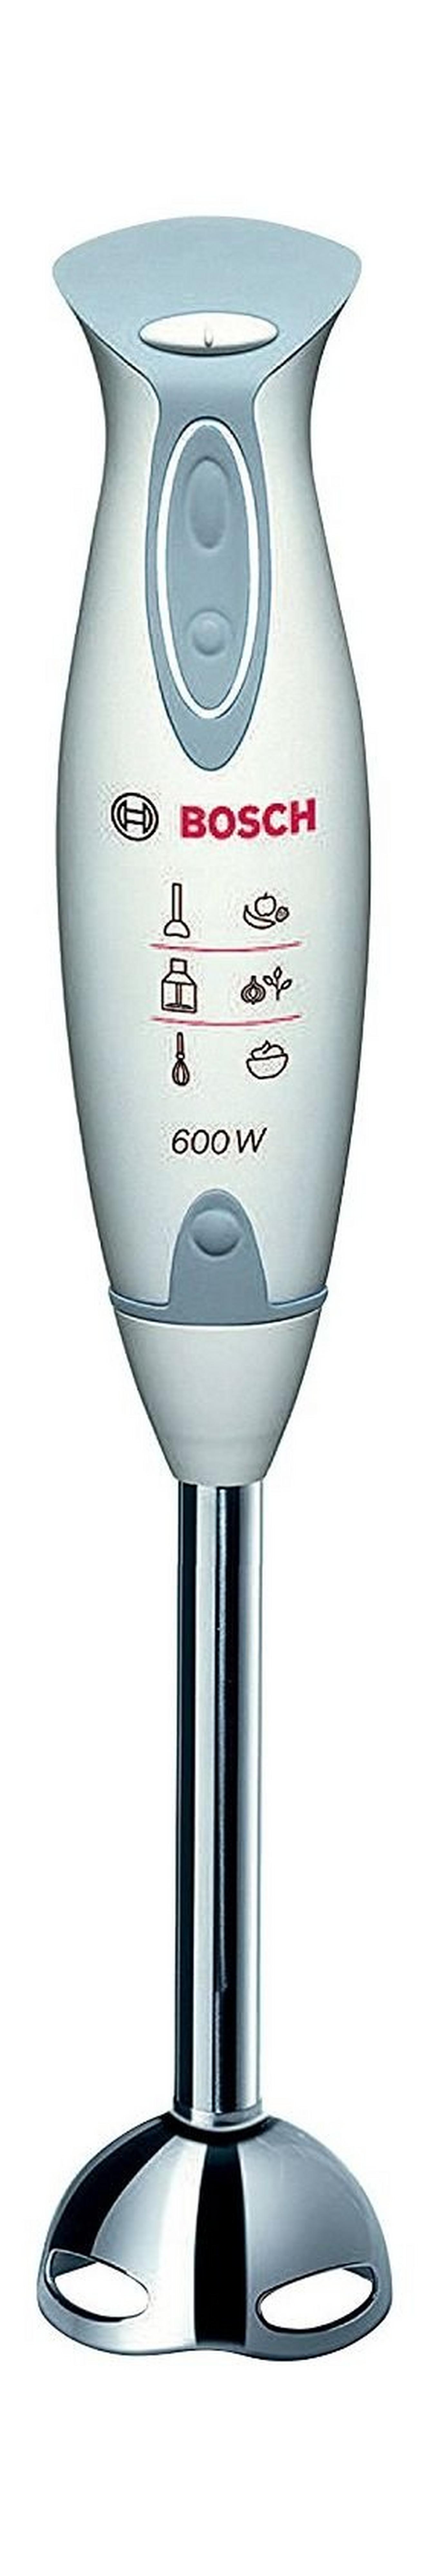 Bosch Hand Blender with Chopper and Whisk - 600W (MSM6700GB)